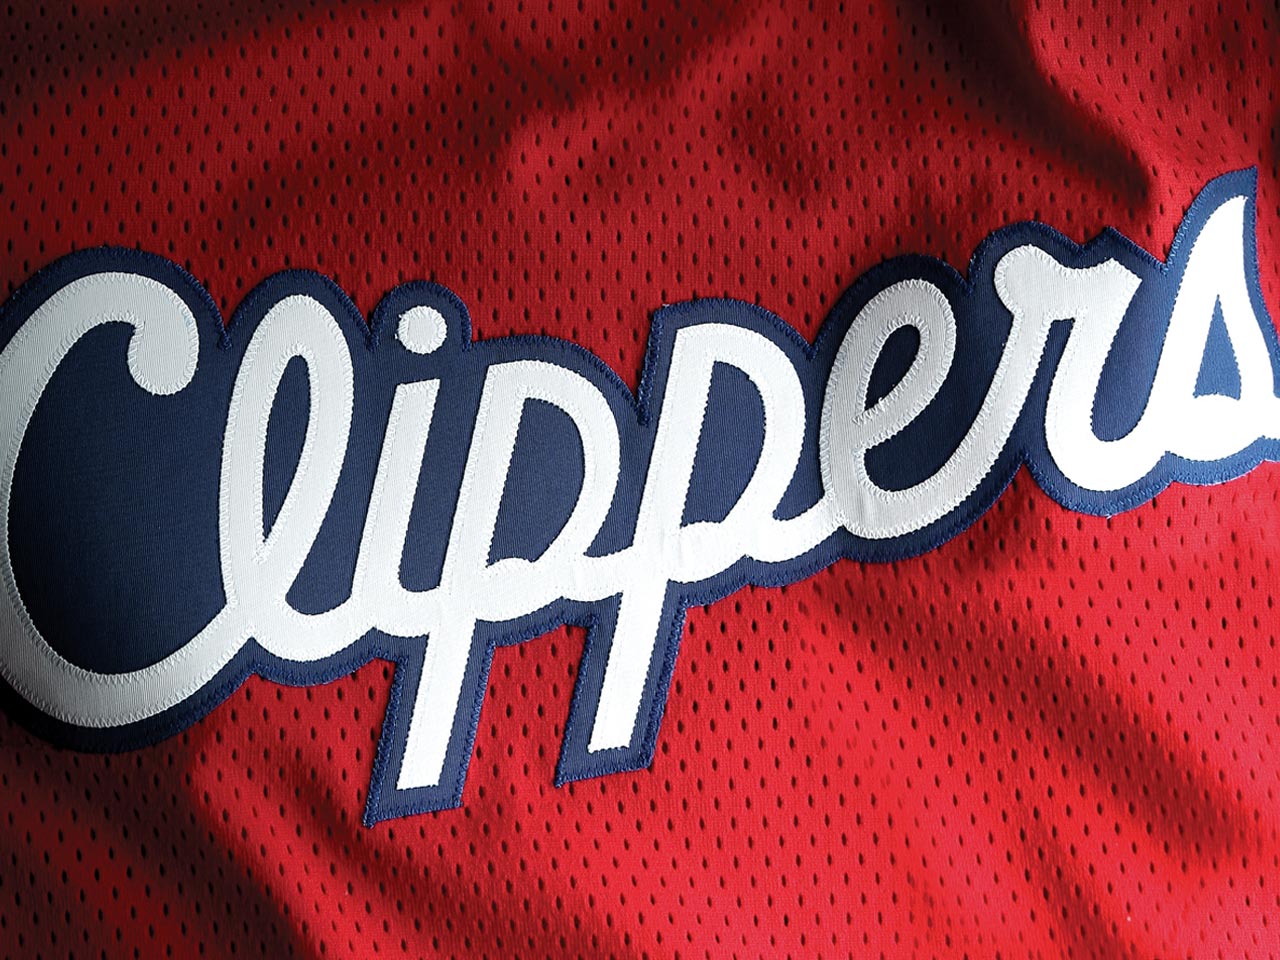  Basketball Los Angeles Clippers Wallpapers 1280x9605 Wallpaper